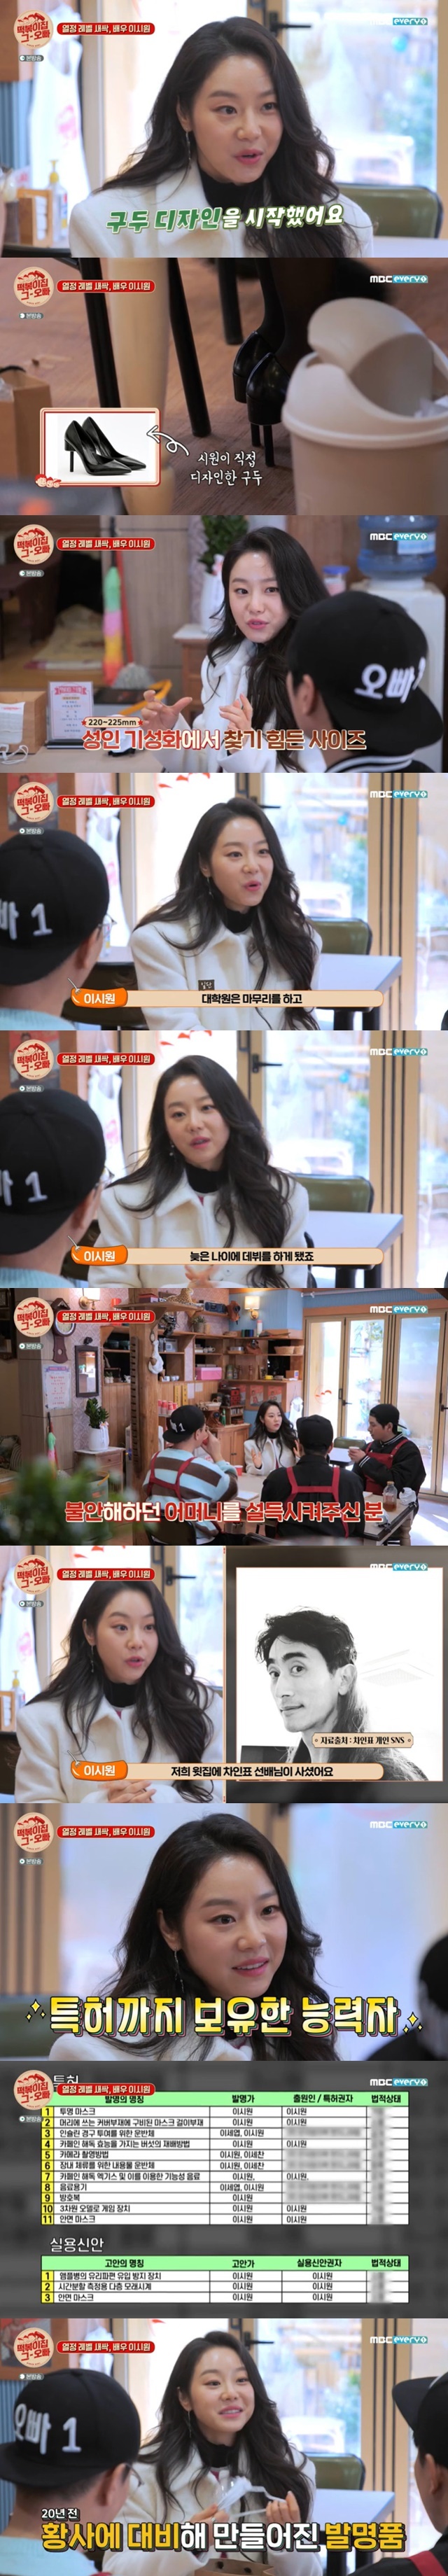 Choi Siwon, a former student at Seoul National University, told her story of becoming a patent richer and her debut as an actor late.Actor Choi Siwon appeared on MBC Everlons Tteokbokki house brother broadcast on February 22.On the day of the broadcast, Choi Siwon said in his class, I was a student who studied quietly during my school days. My dream was a painter until junior high school.I was a painter because I liked the picture so much, but I worked harder (studying) in high school because I had to work on my parents pressures and studies.Im small to be a foot, said Choi Siwon, who designed Guddu for a dream that was not done. I wear 220mm to 225mm, but there are many things that dont come in size.The beauty of foreign sites was 6.3 million won, and I started to make it. My feet were so small and pretty Guddu was so expensive.I think its good to give me something I can give, he said.Lee Choi Siwon also released a mens Guddu, saying he made shoes for his husband.Lets do what we want to do when were living a life, said Choi Siwon, a graduate student at Seoul National University.I wanted to go to the acting academy in front of the school and ask if I could play. It was my last year in graduate school.I went to the academy and the camera manager gave me a chance to see him properly, so I saw him.I finished graduate school and made my debut at a late age.After the appearance of Choi Siwons drama was confirmed, she informed her mother about her debut, and her mother opened her mind with concern, but an unexpected figure helped persuade her.The one who reassures my mother was up there, Cha In-pyo, who lives here, and dont get too prejudiced. Good, good people do this.Its not easy to do this, so she asked me to cheer on it, so my mother gave me permission.Lee Siwon also majored in business administration and anthropology at Seoul National University.Choi Siwon said, I thought of how to make lactic acid bacteria into melon seeds, inspired by fruit seeds that stay long in human intestines. I have more than 10 patents that I have with curiosity to utilize and apply what I learned in such a way.Among them were the most recently used transparent masks.